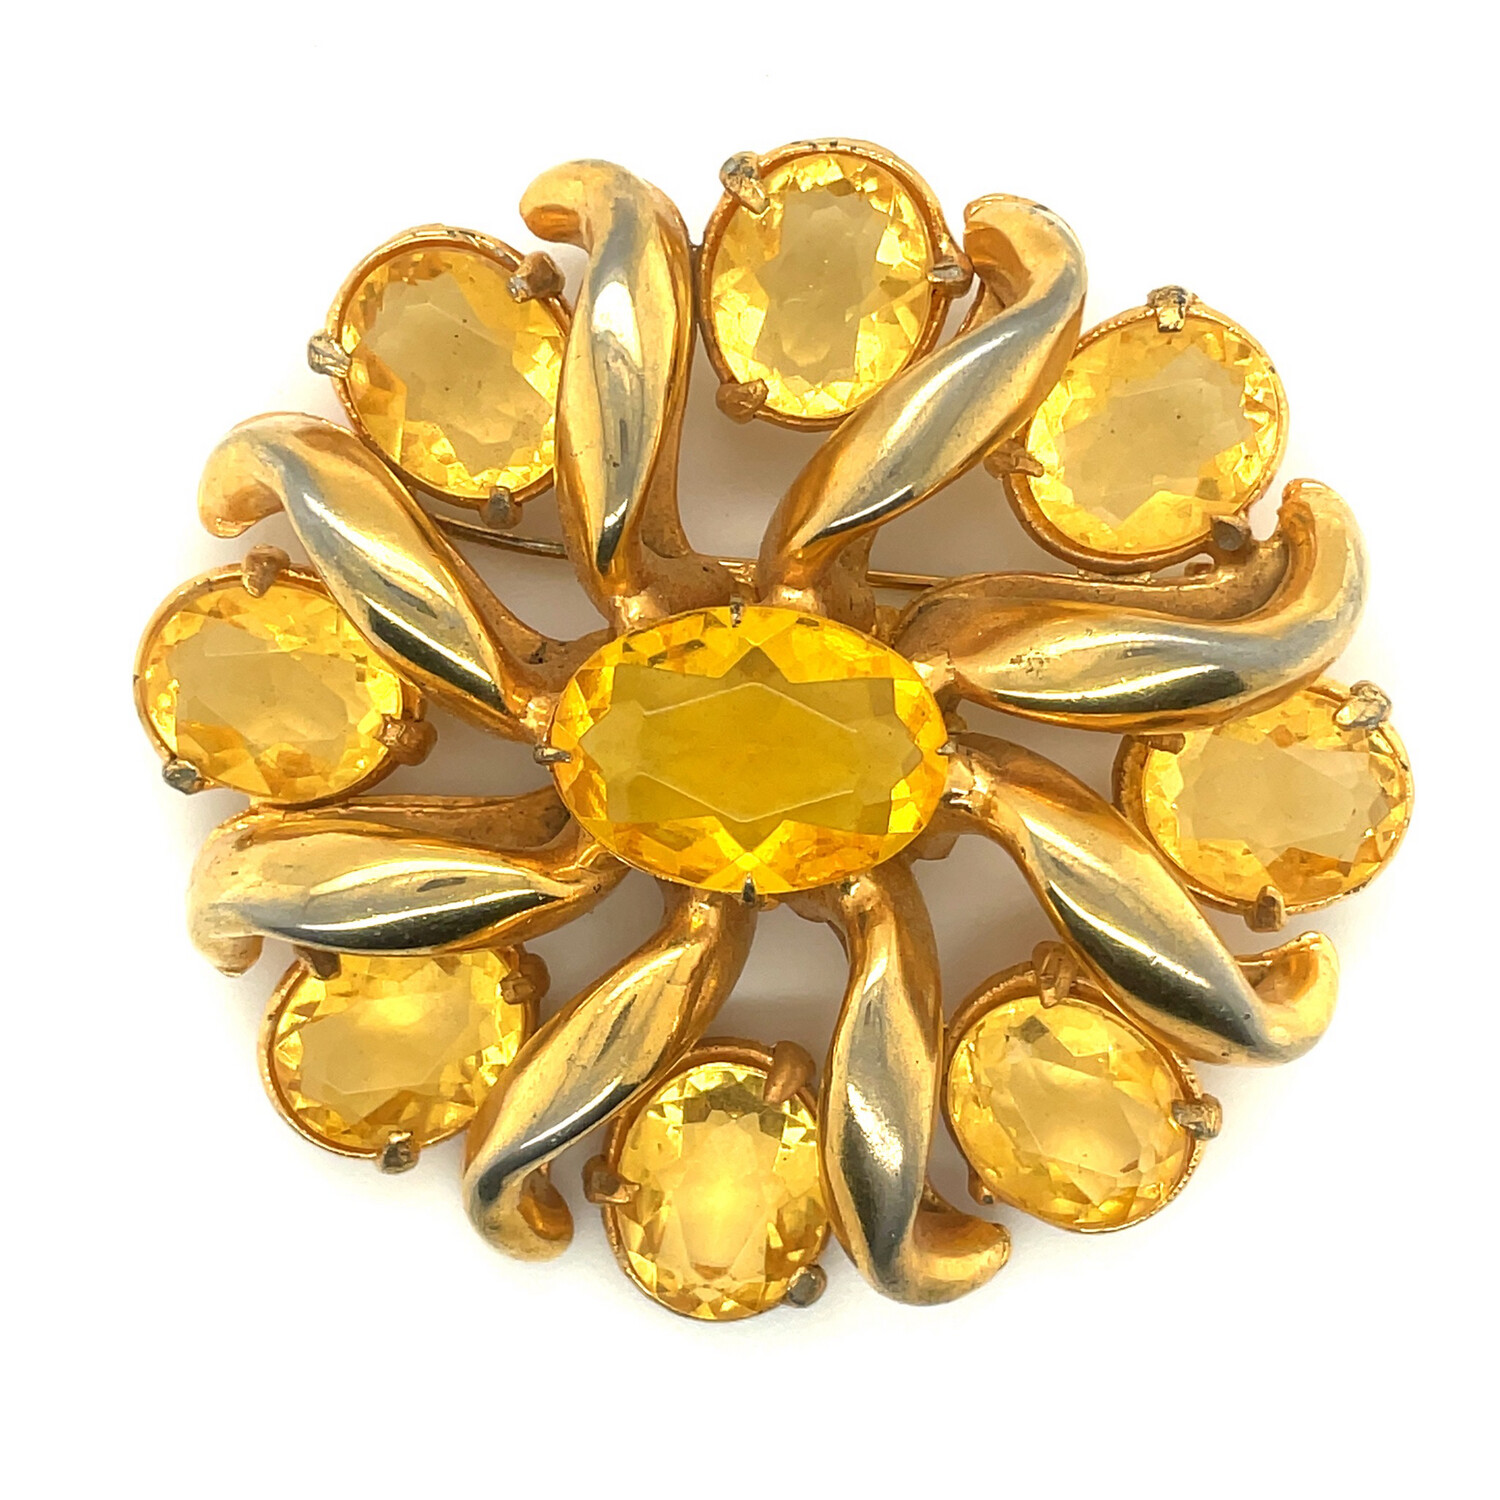 Vintage Unsigned Faux Citrine Brooch 1940’s